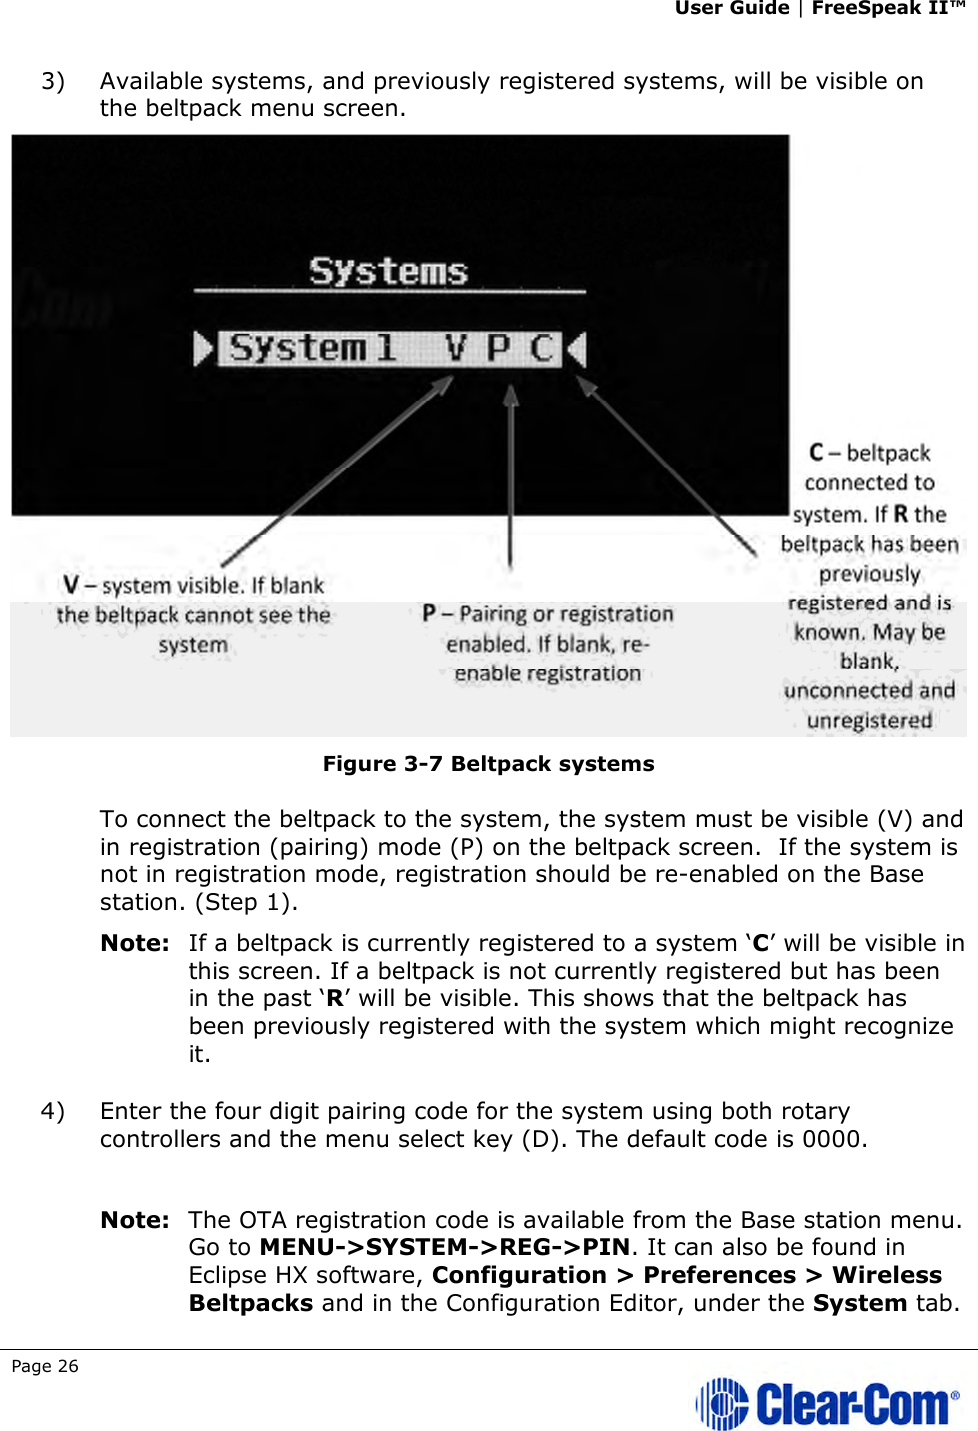 User Guide | FreeSpeak II™  Page 26   3) Available systems, and previously registered systems, will be visible on the beltpack menu screen.   Figure 3-7 Beltpack systems To connect the beltpack to the system, the system must be visible (V) and in registration (pairing) mode (P) on the beltpack screen.  If the system is not in registration mode, registration should be re-enabled on the Base station. (Step 1).  Note: If a beltpack is currently registered to a system ‘C’ will be visible in this screen. If a beltpack is not currently registered but has been in the past ‘R’ will be visible. This shows that the beltpack has been previously registered with the system which might recognize it.  4) Enter the four digit pairing code for the system using both rotary controllers and the menu select key (D). The default code is 0000.   Note: The OTA registration code is available from the Base station menu. Go to MENU-&gt;SYSTEM-&gt;REG-&gt;PIN. It can also be found in Eclipse HX software, Configuration &gt; Preferences &gt; Wireless Beltpacks and in the Configuration Editor, under the System tab. 